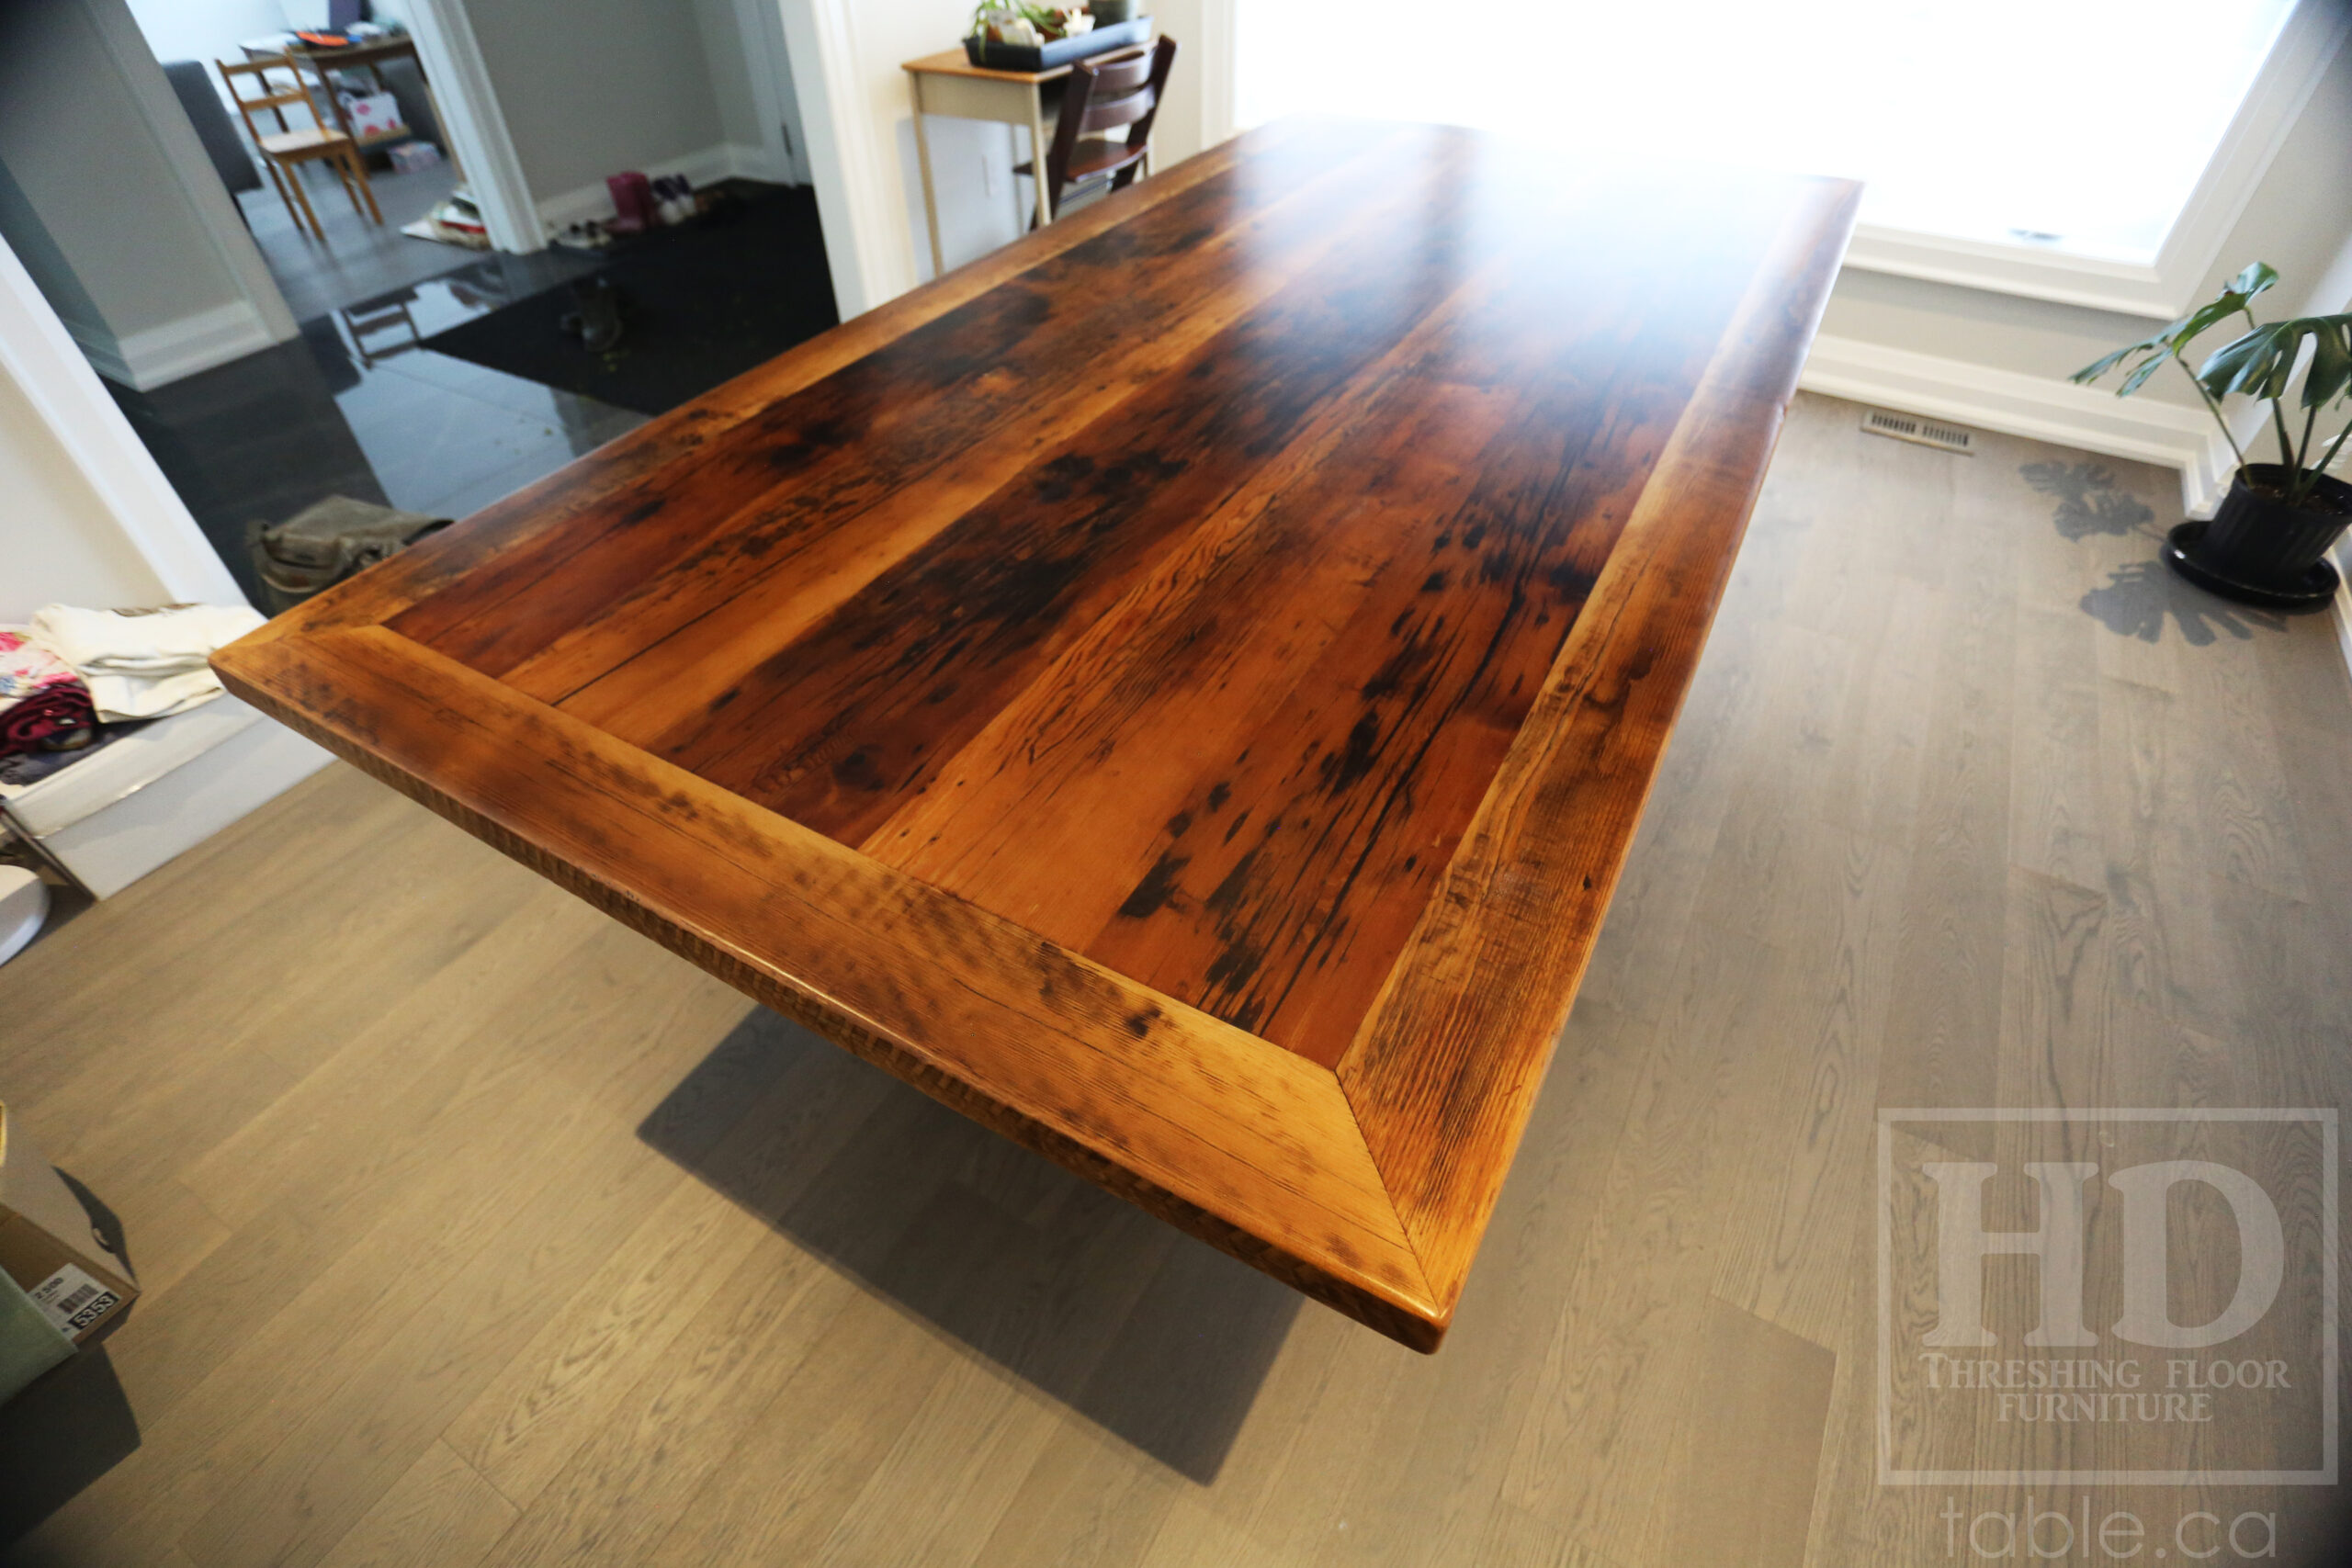 8’ Reclaimed Ontario Barnwood Table we made for an Toronto, Ontario home – 48” wide – Matte Black Steel Base – Mitered Corners Option - Old Growth Hemlock Threshing Floor Construction - Original edges & distressing maintained – Bread Edge Ends - Premium epoxy + satin polyurethane finish – www.table.ca